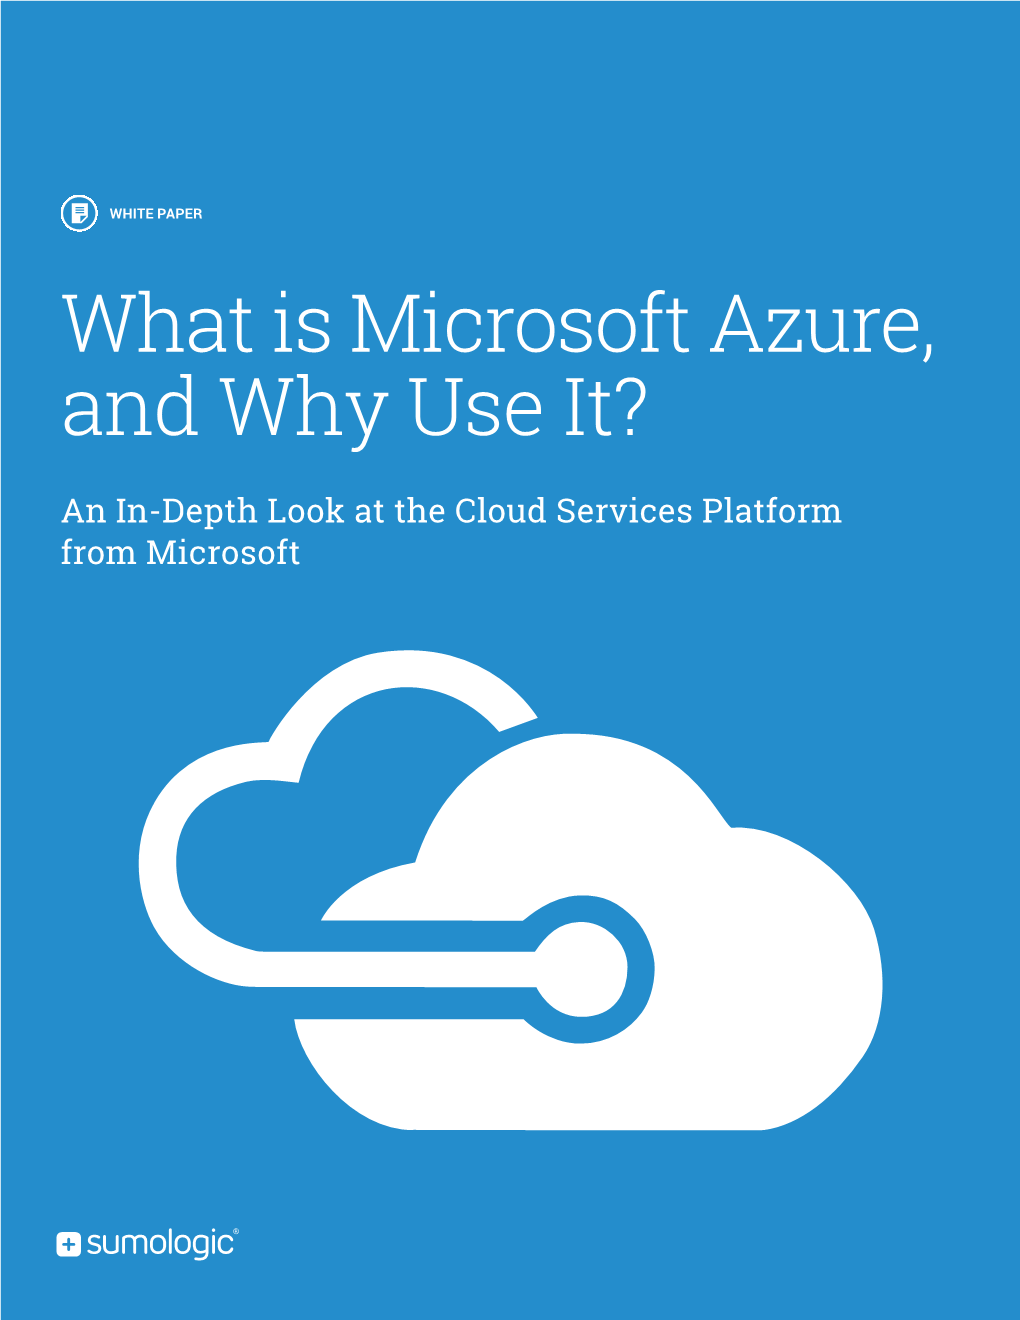 What Is Microsoft Azure, and Why Use It?